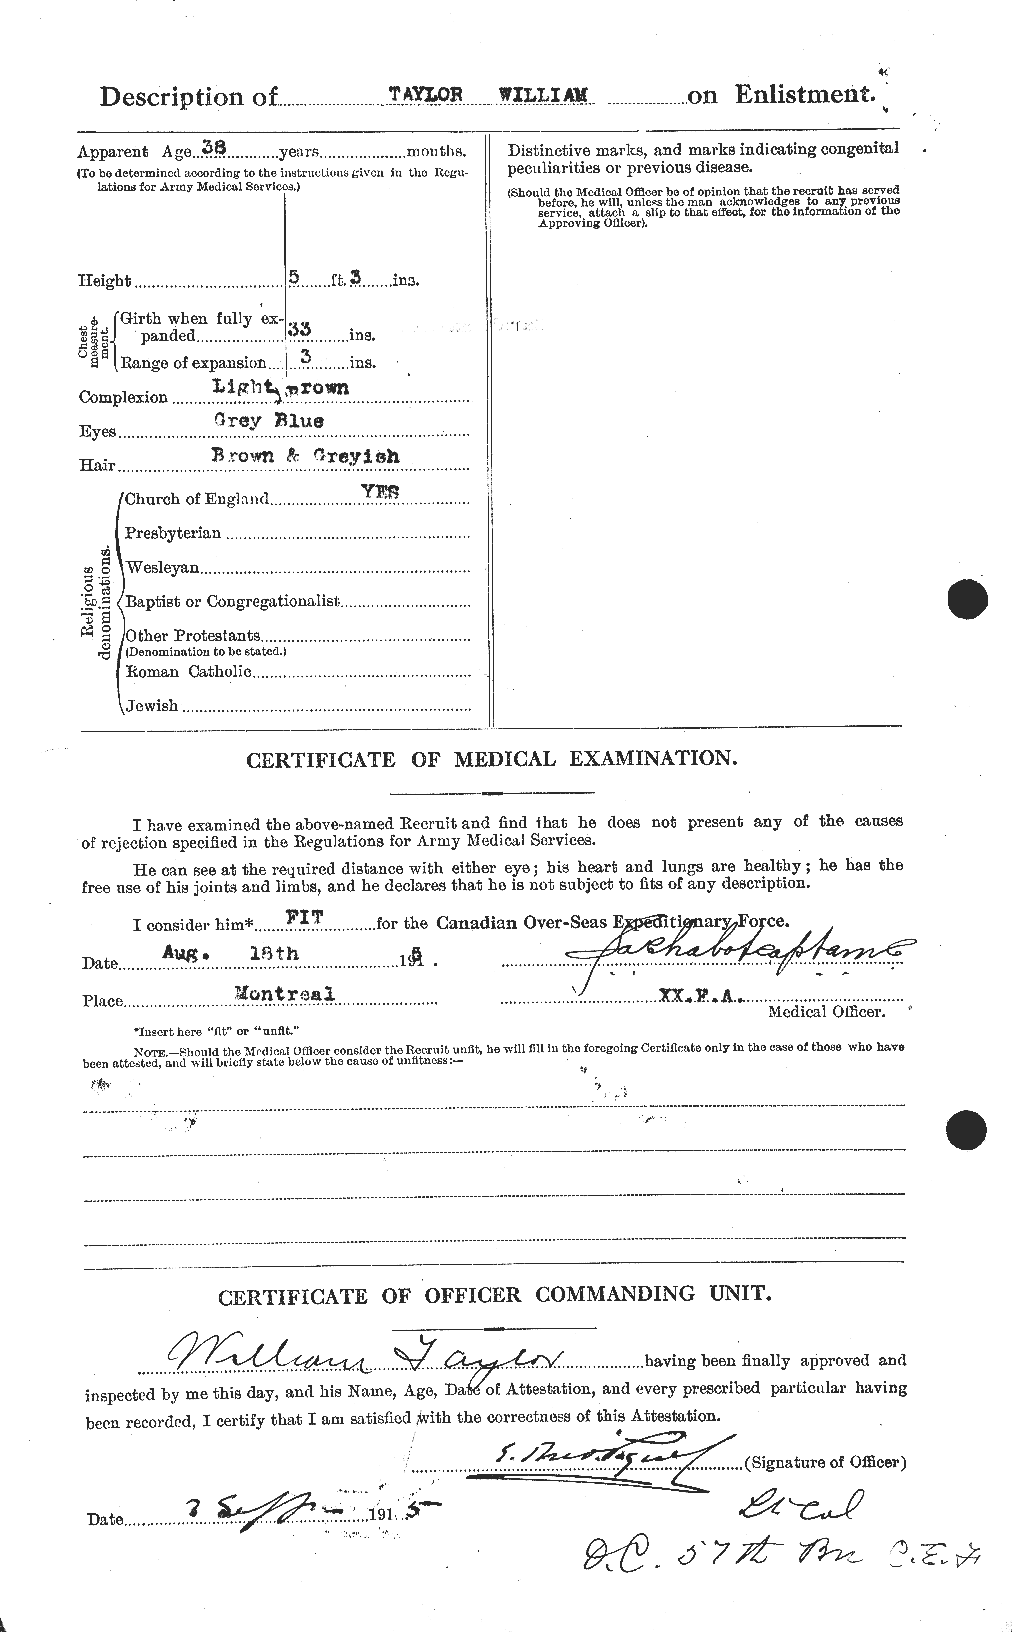 Personnel Records of the First World War - CEF 628166b